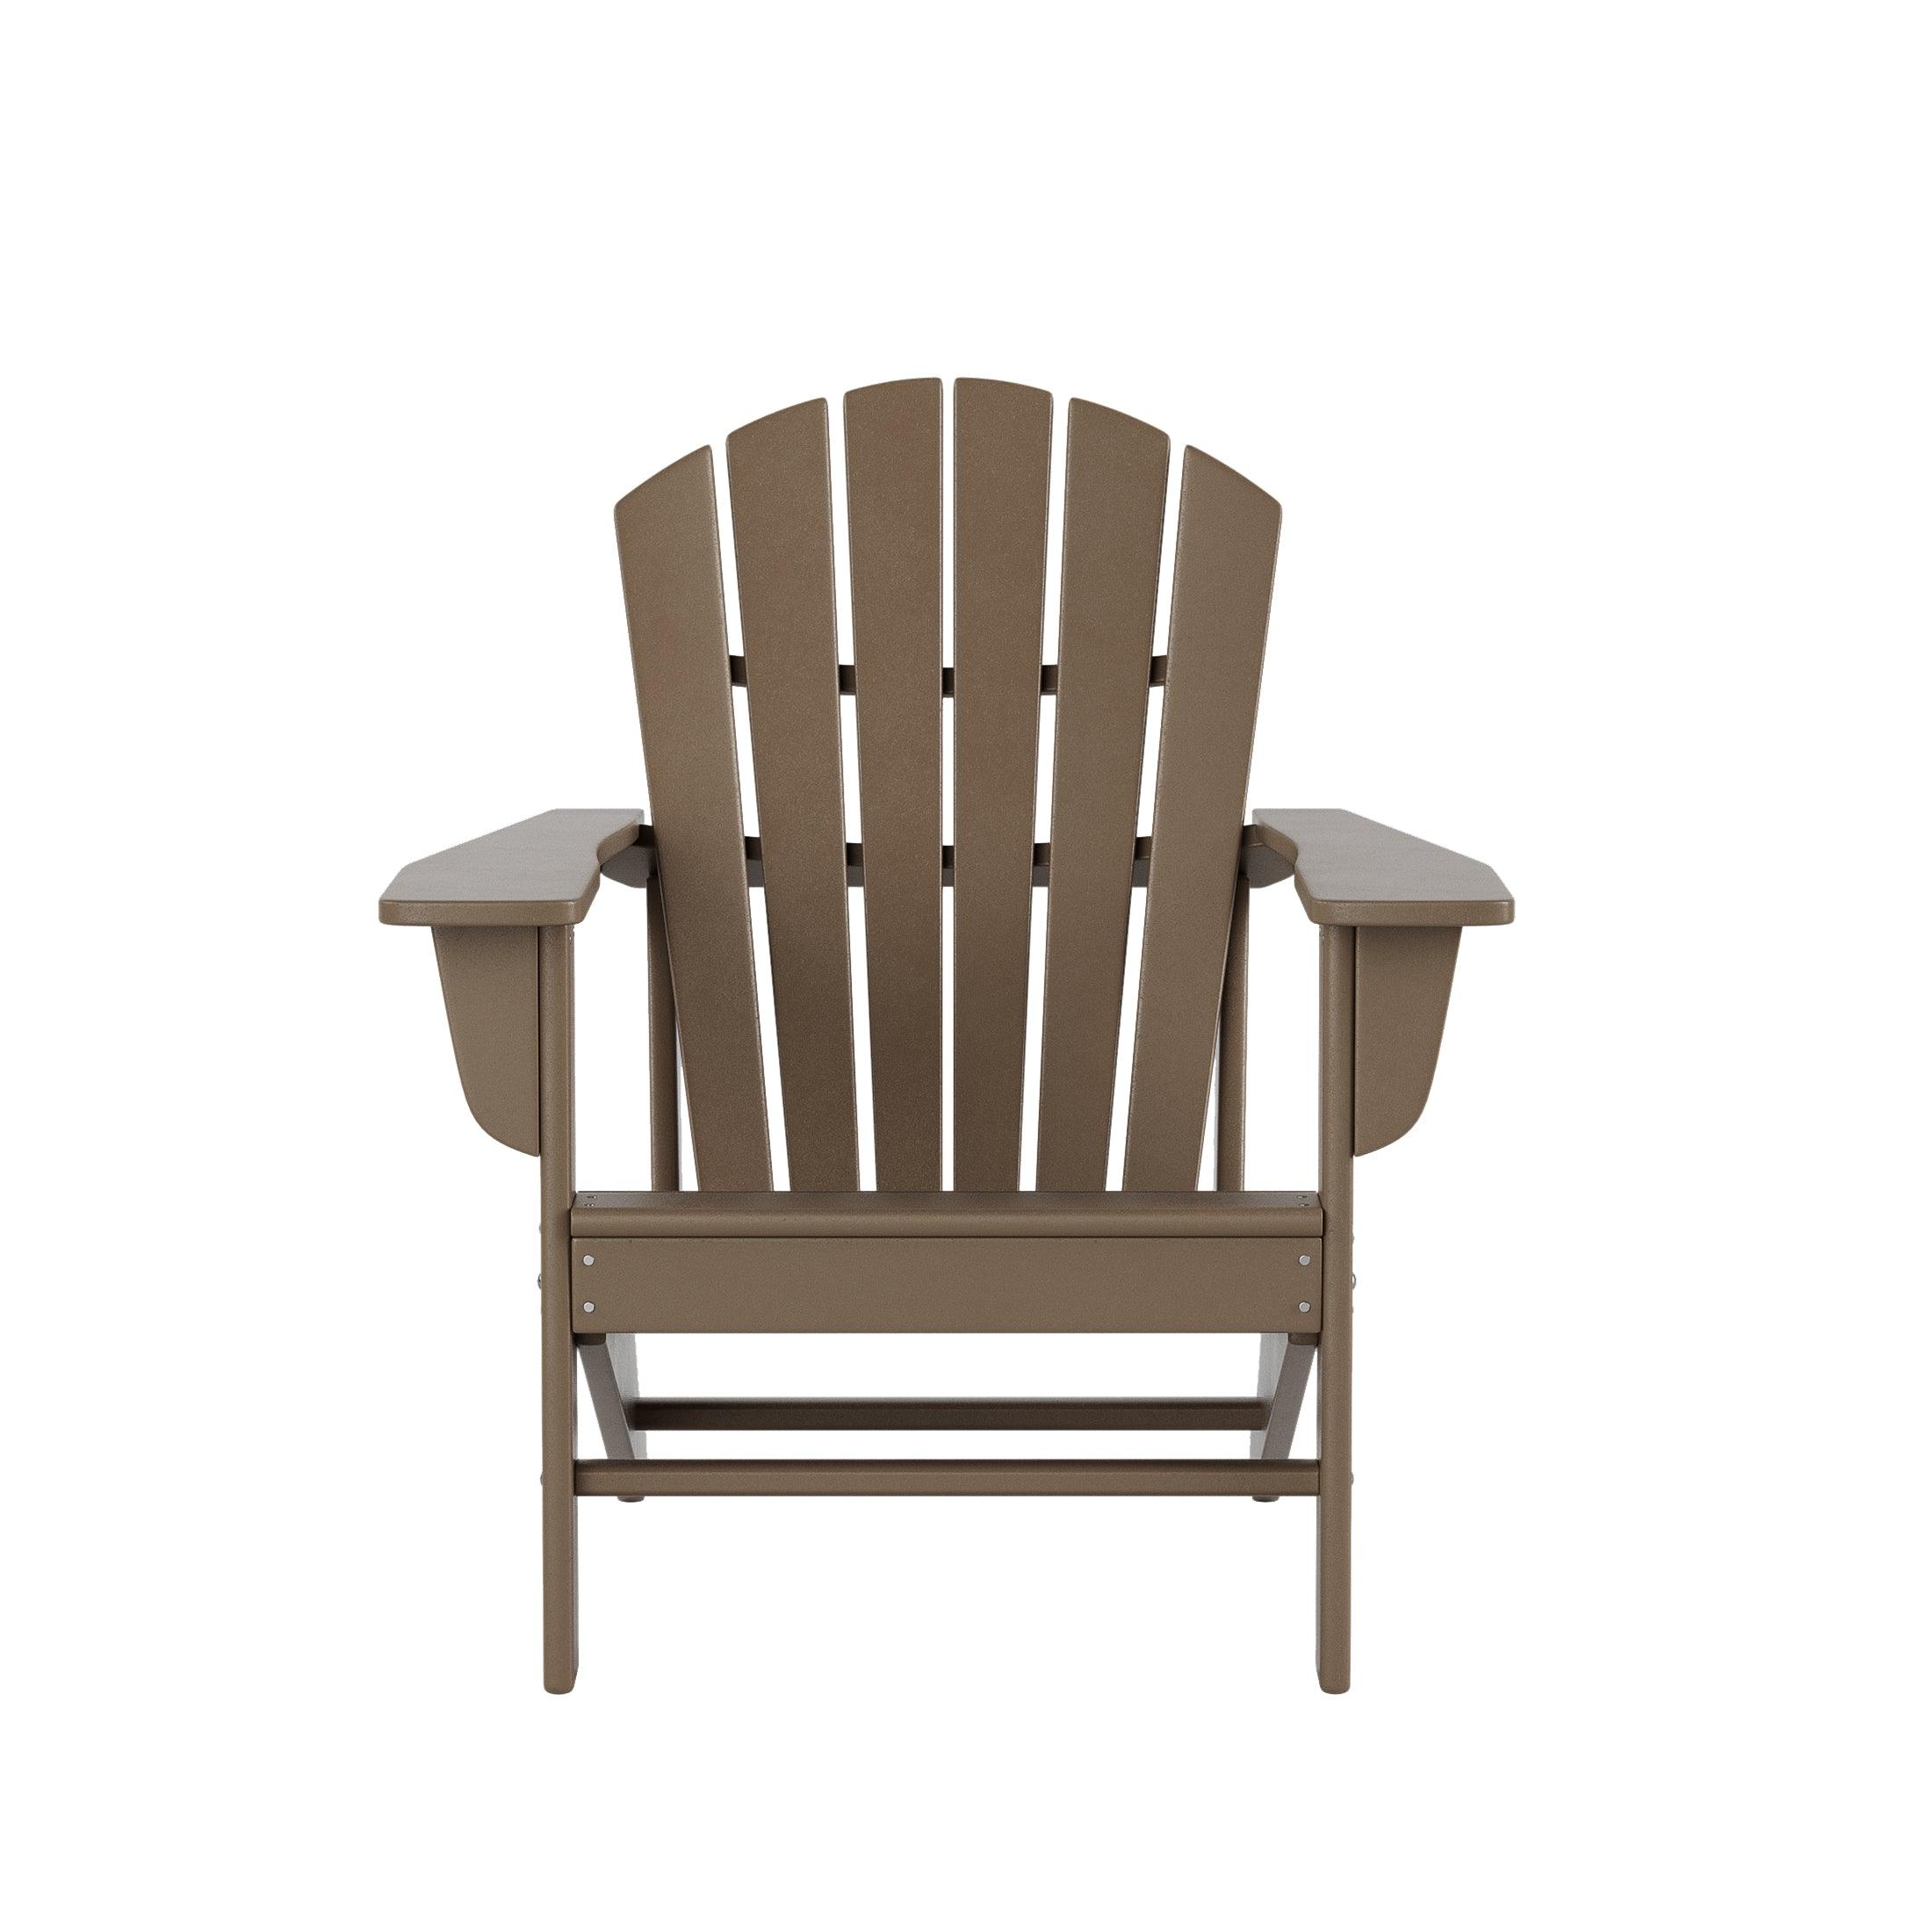 Costaelm Outdoor Adirondack Chair With Ottoman 2-Piece Set, Weathered Wood